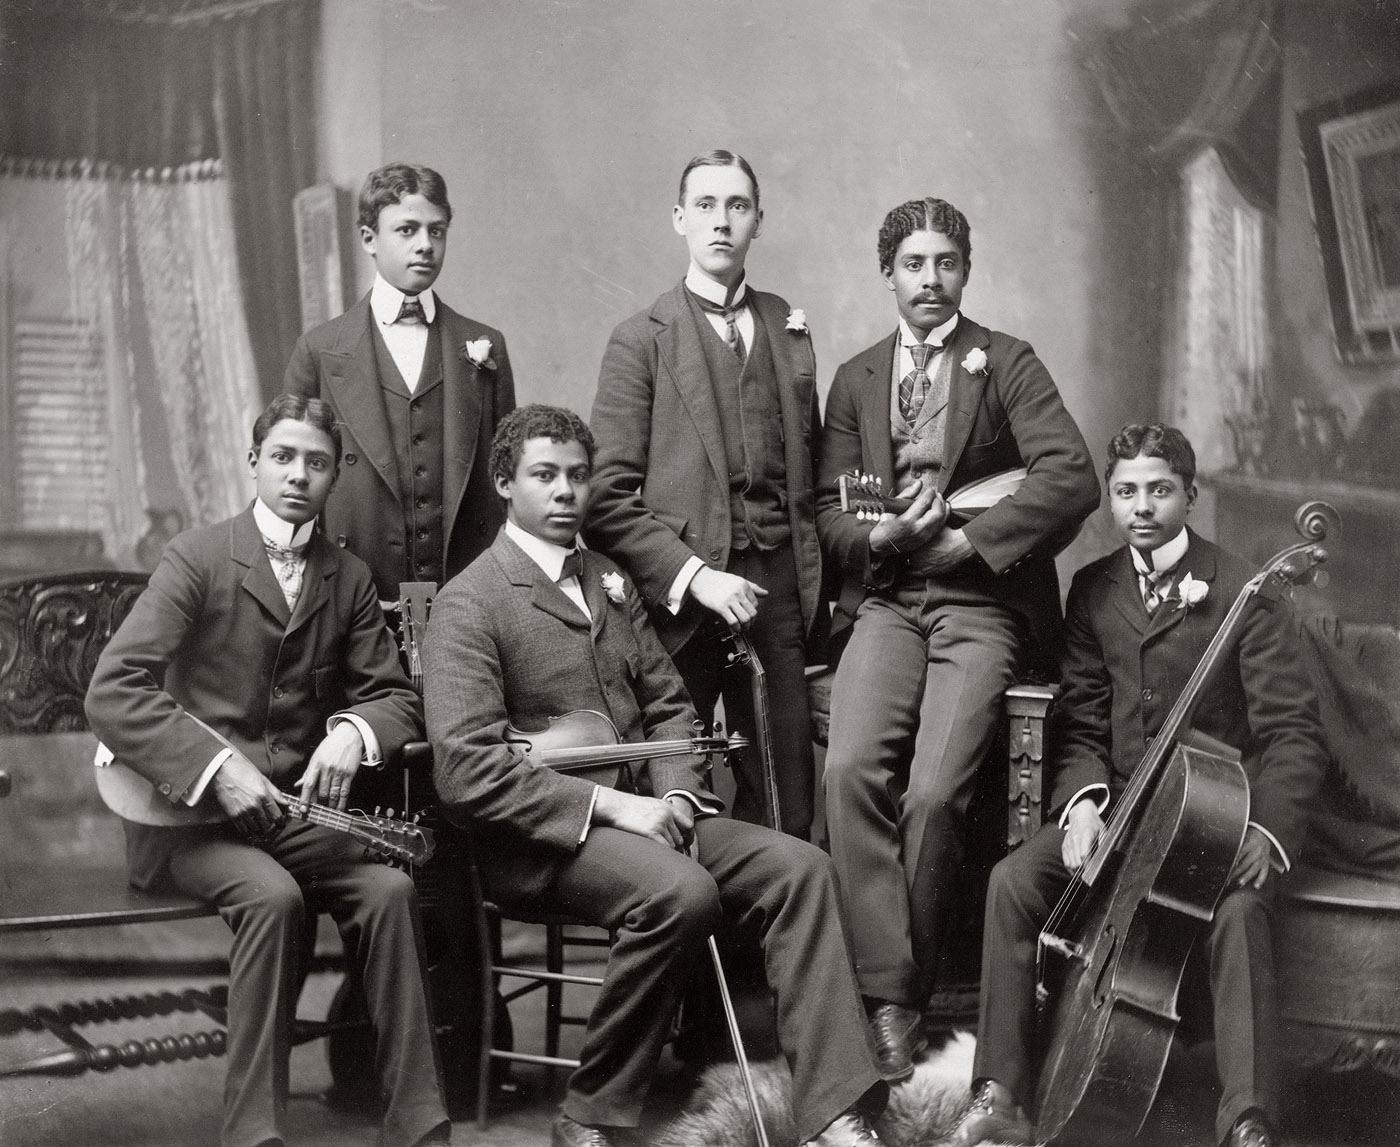 "Summit Avenue Ensemble." Photographer Thomas Askew's twin sons Clarence and Norman, son Arthur, neighbor Jake Sansome, and sons Robert and Walter at the Askew home in Atlanta. 1899 or 1900. View full size. The Askew residence, at 114 Summit Avenue, burned in the Great Fire of 1917.